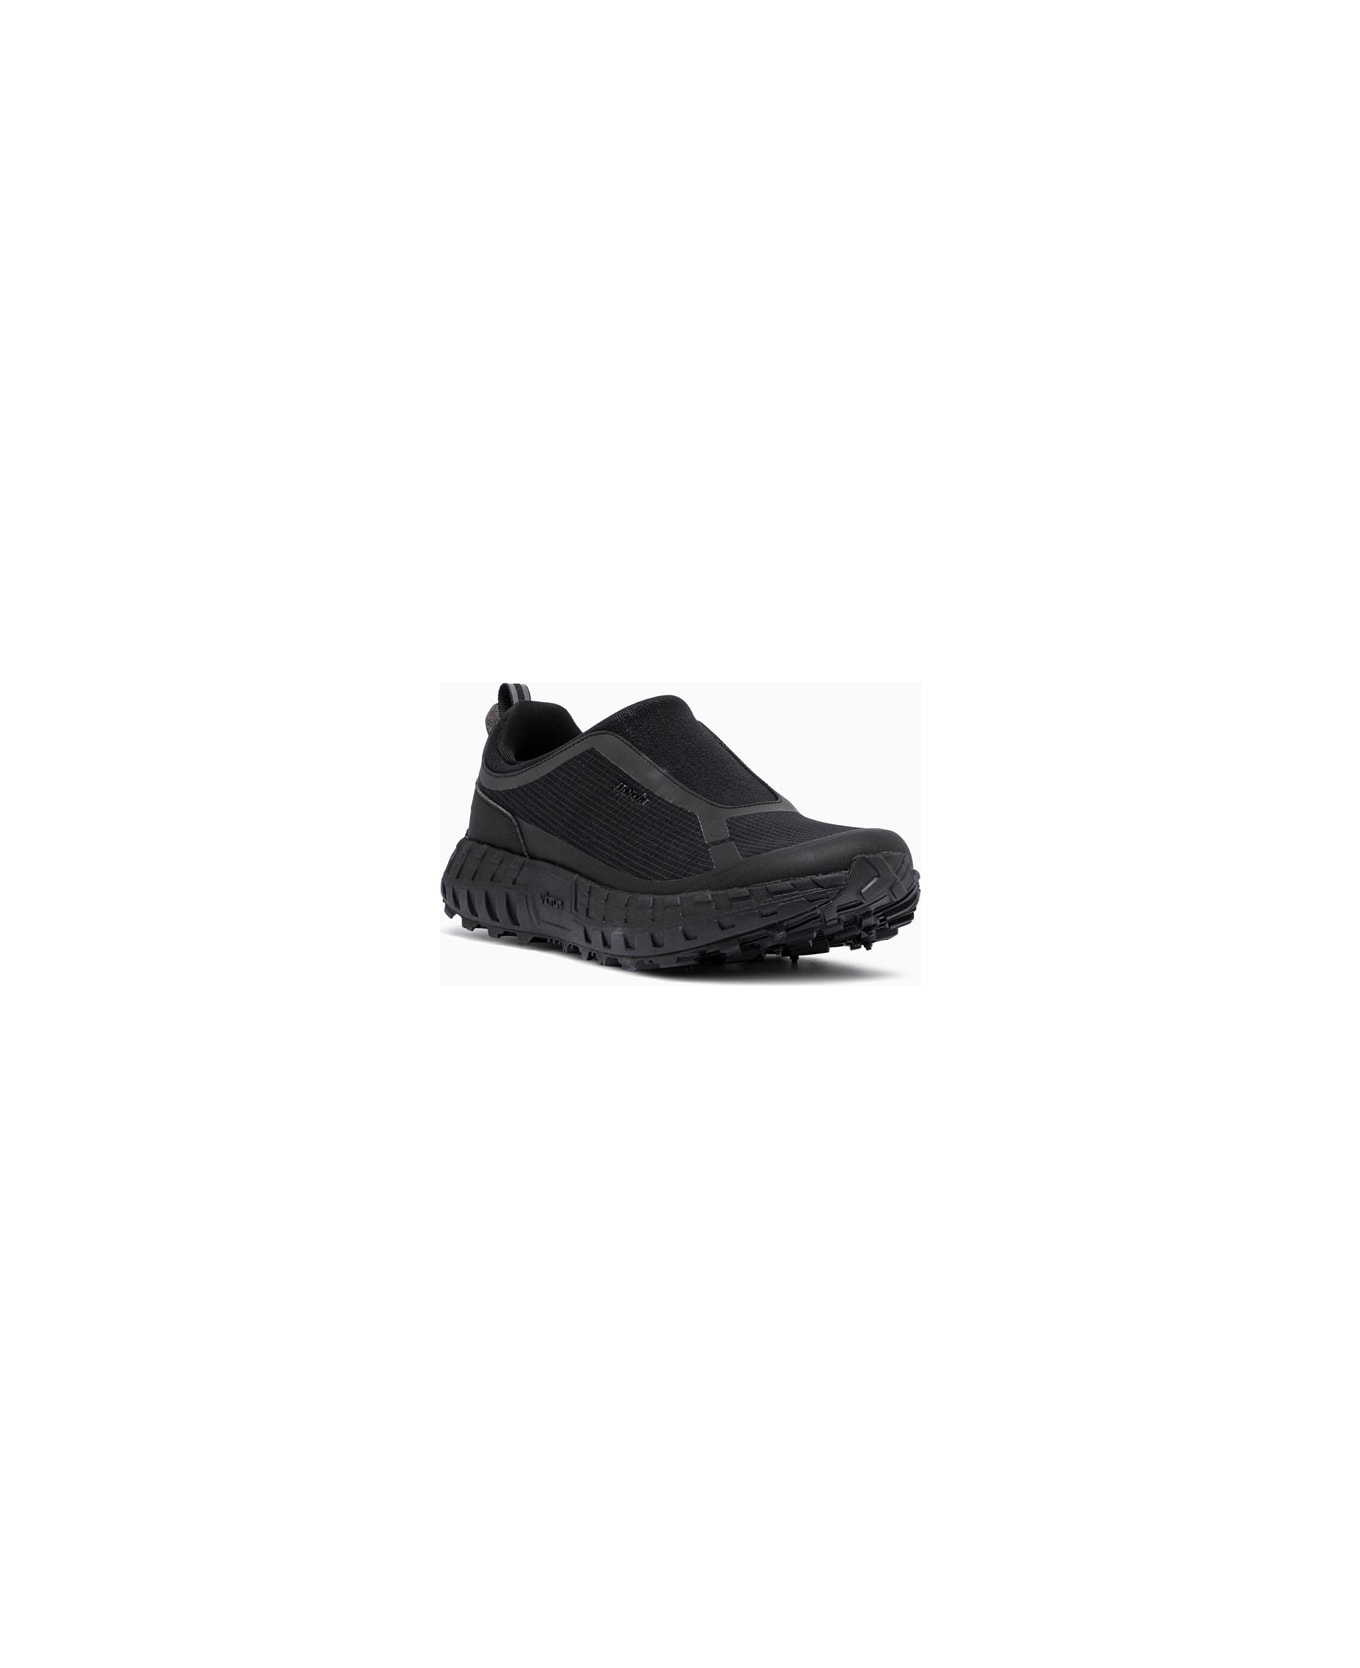 Norda The 003 Pitch Black 2028 Sneakers - Black